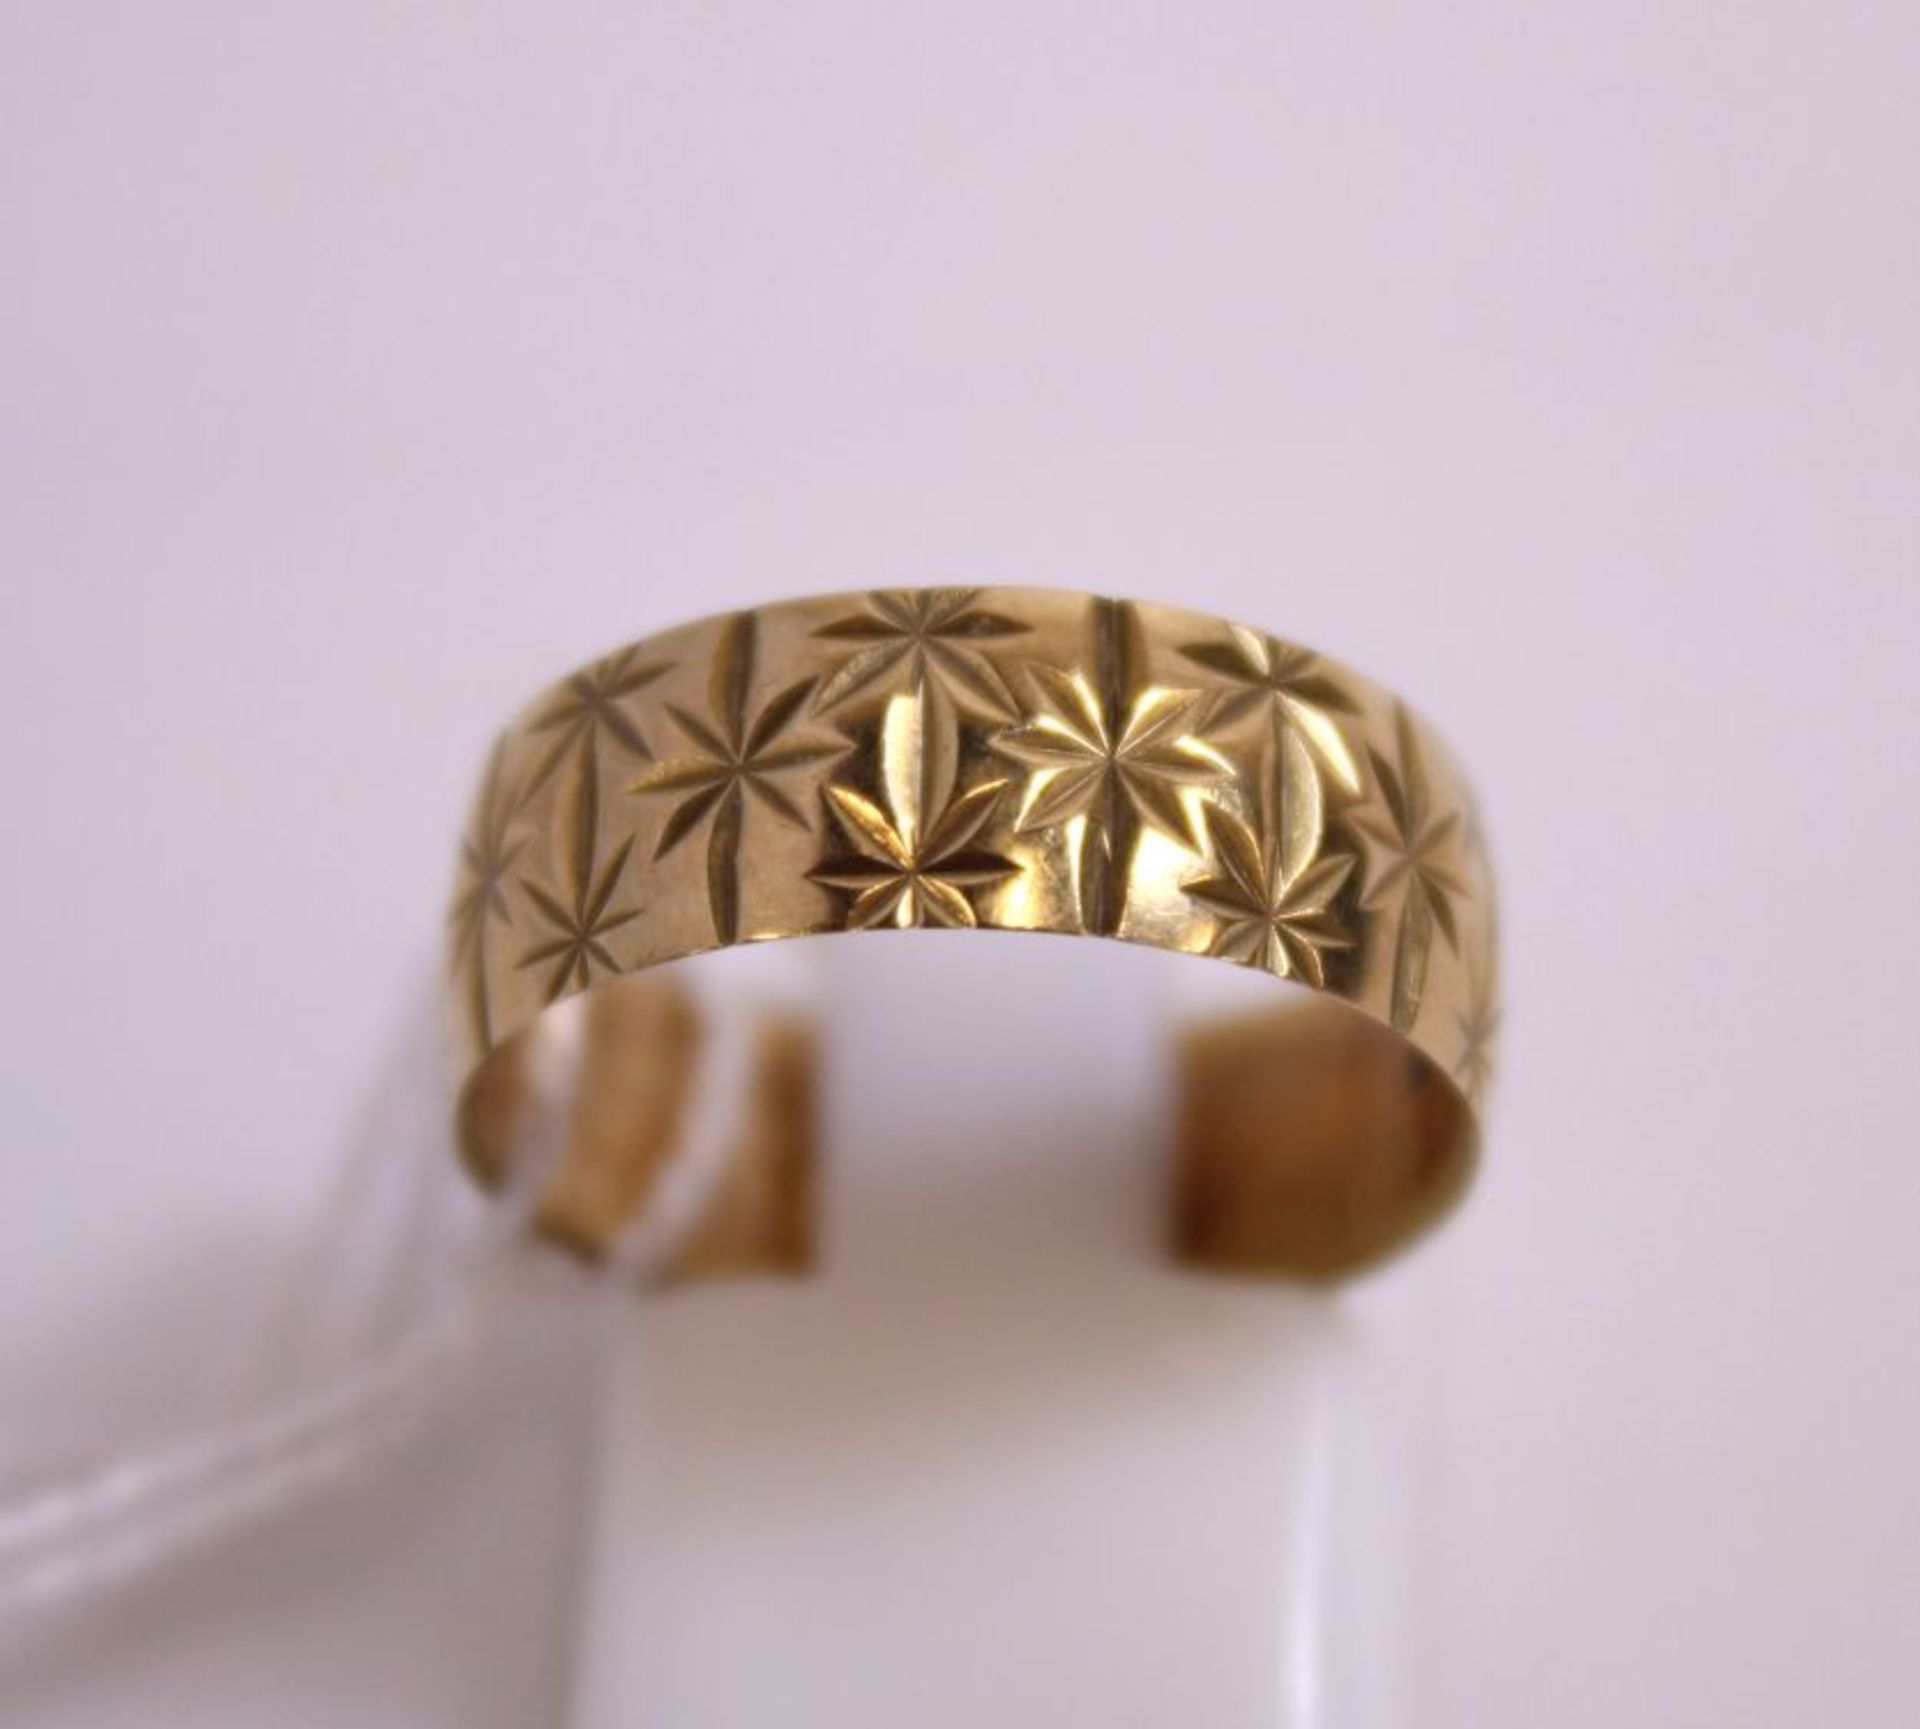 A 9ct Gold Ring with Star of Bethlehem design (Size O½) 3g (Est. £40-£70) - Image 2 of 2